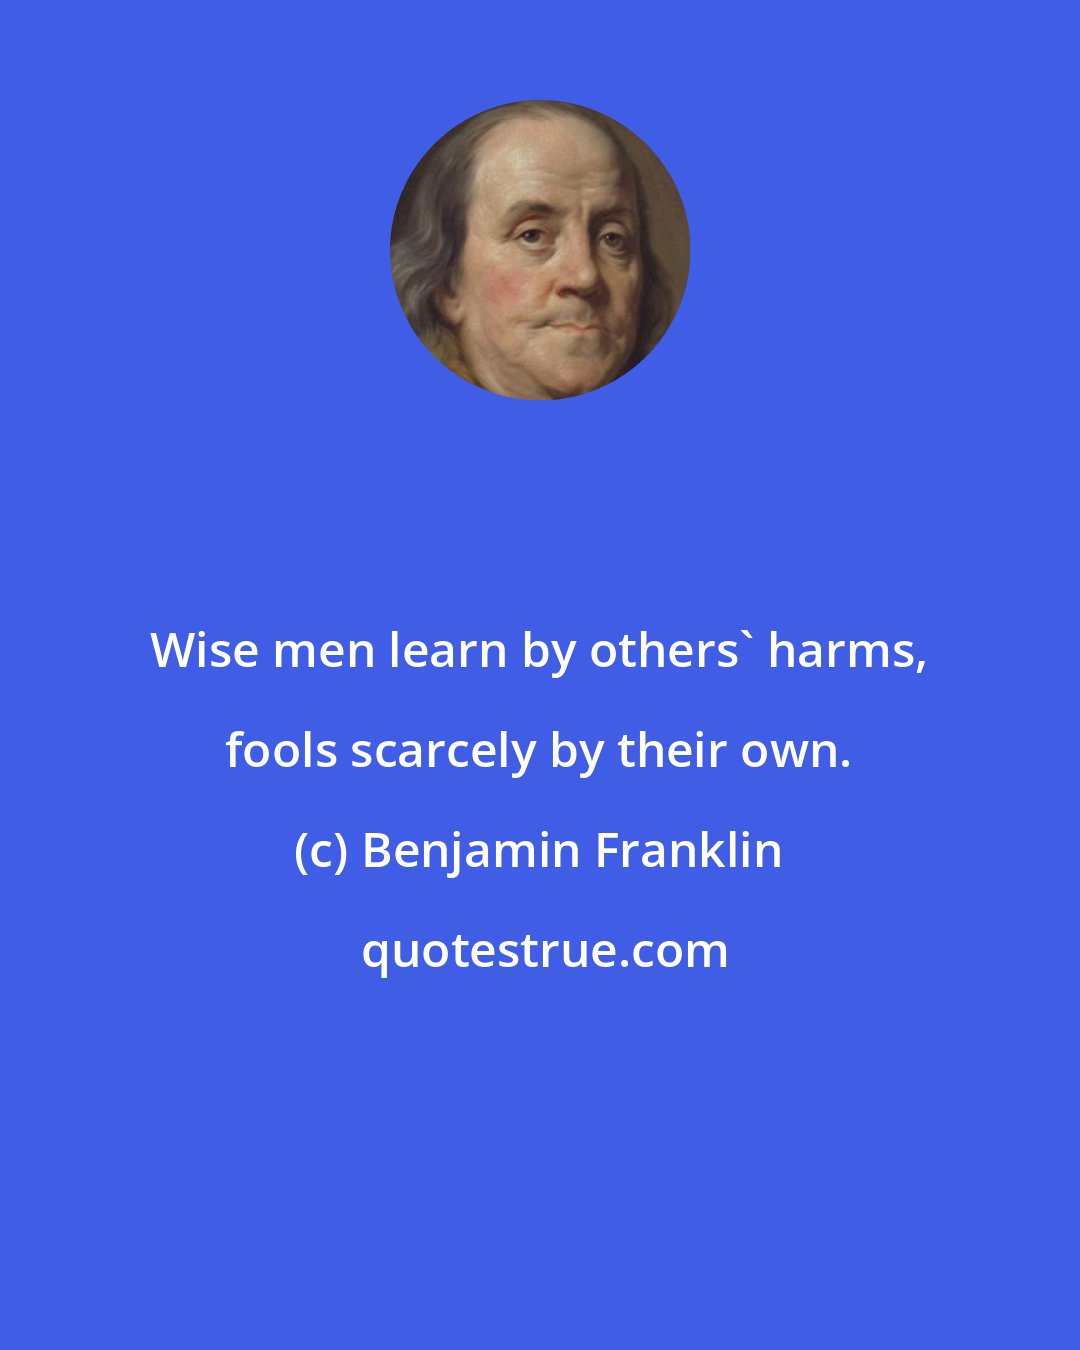 Benjamin Franklin: Wise men learn by others' harms, fools scarcely by their own.